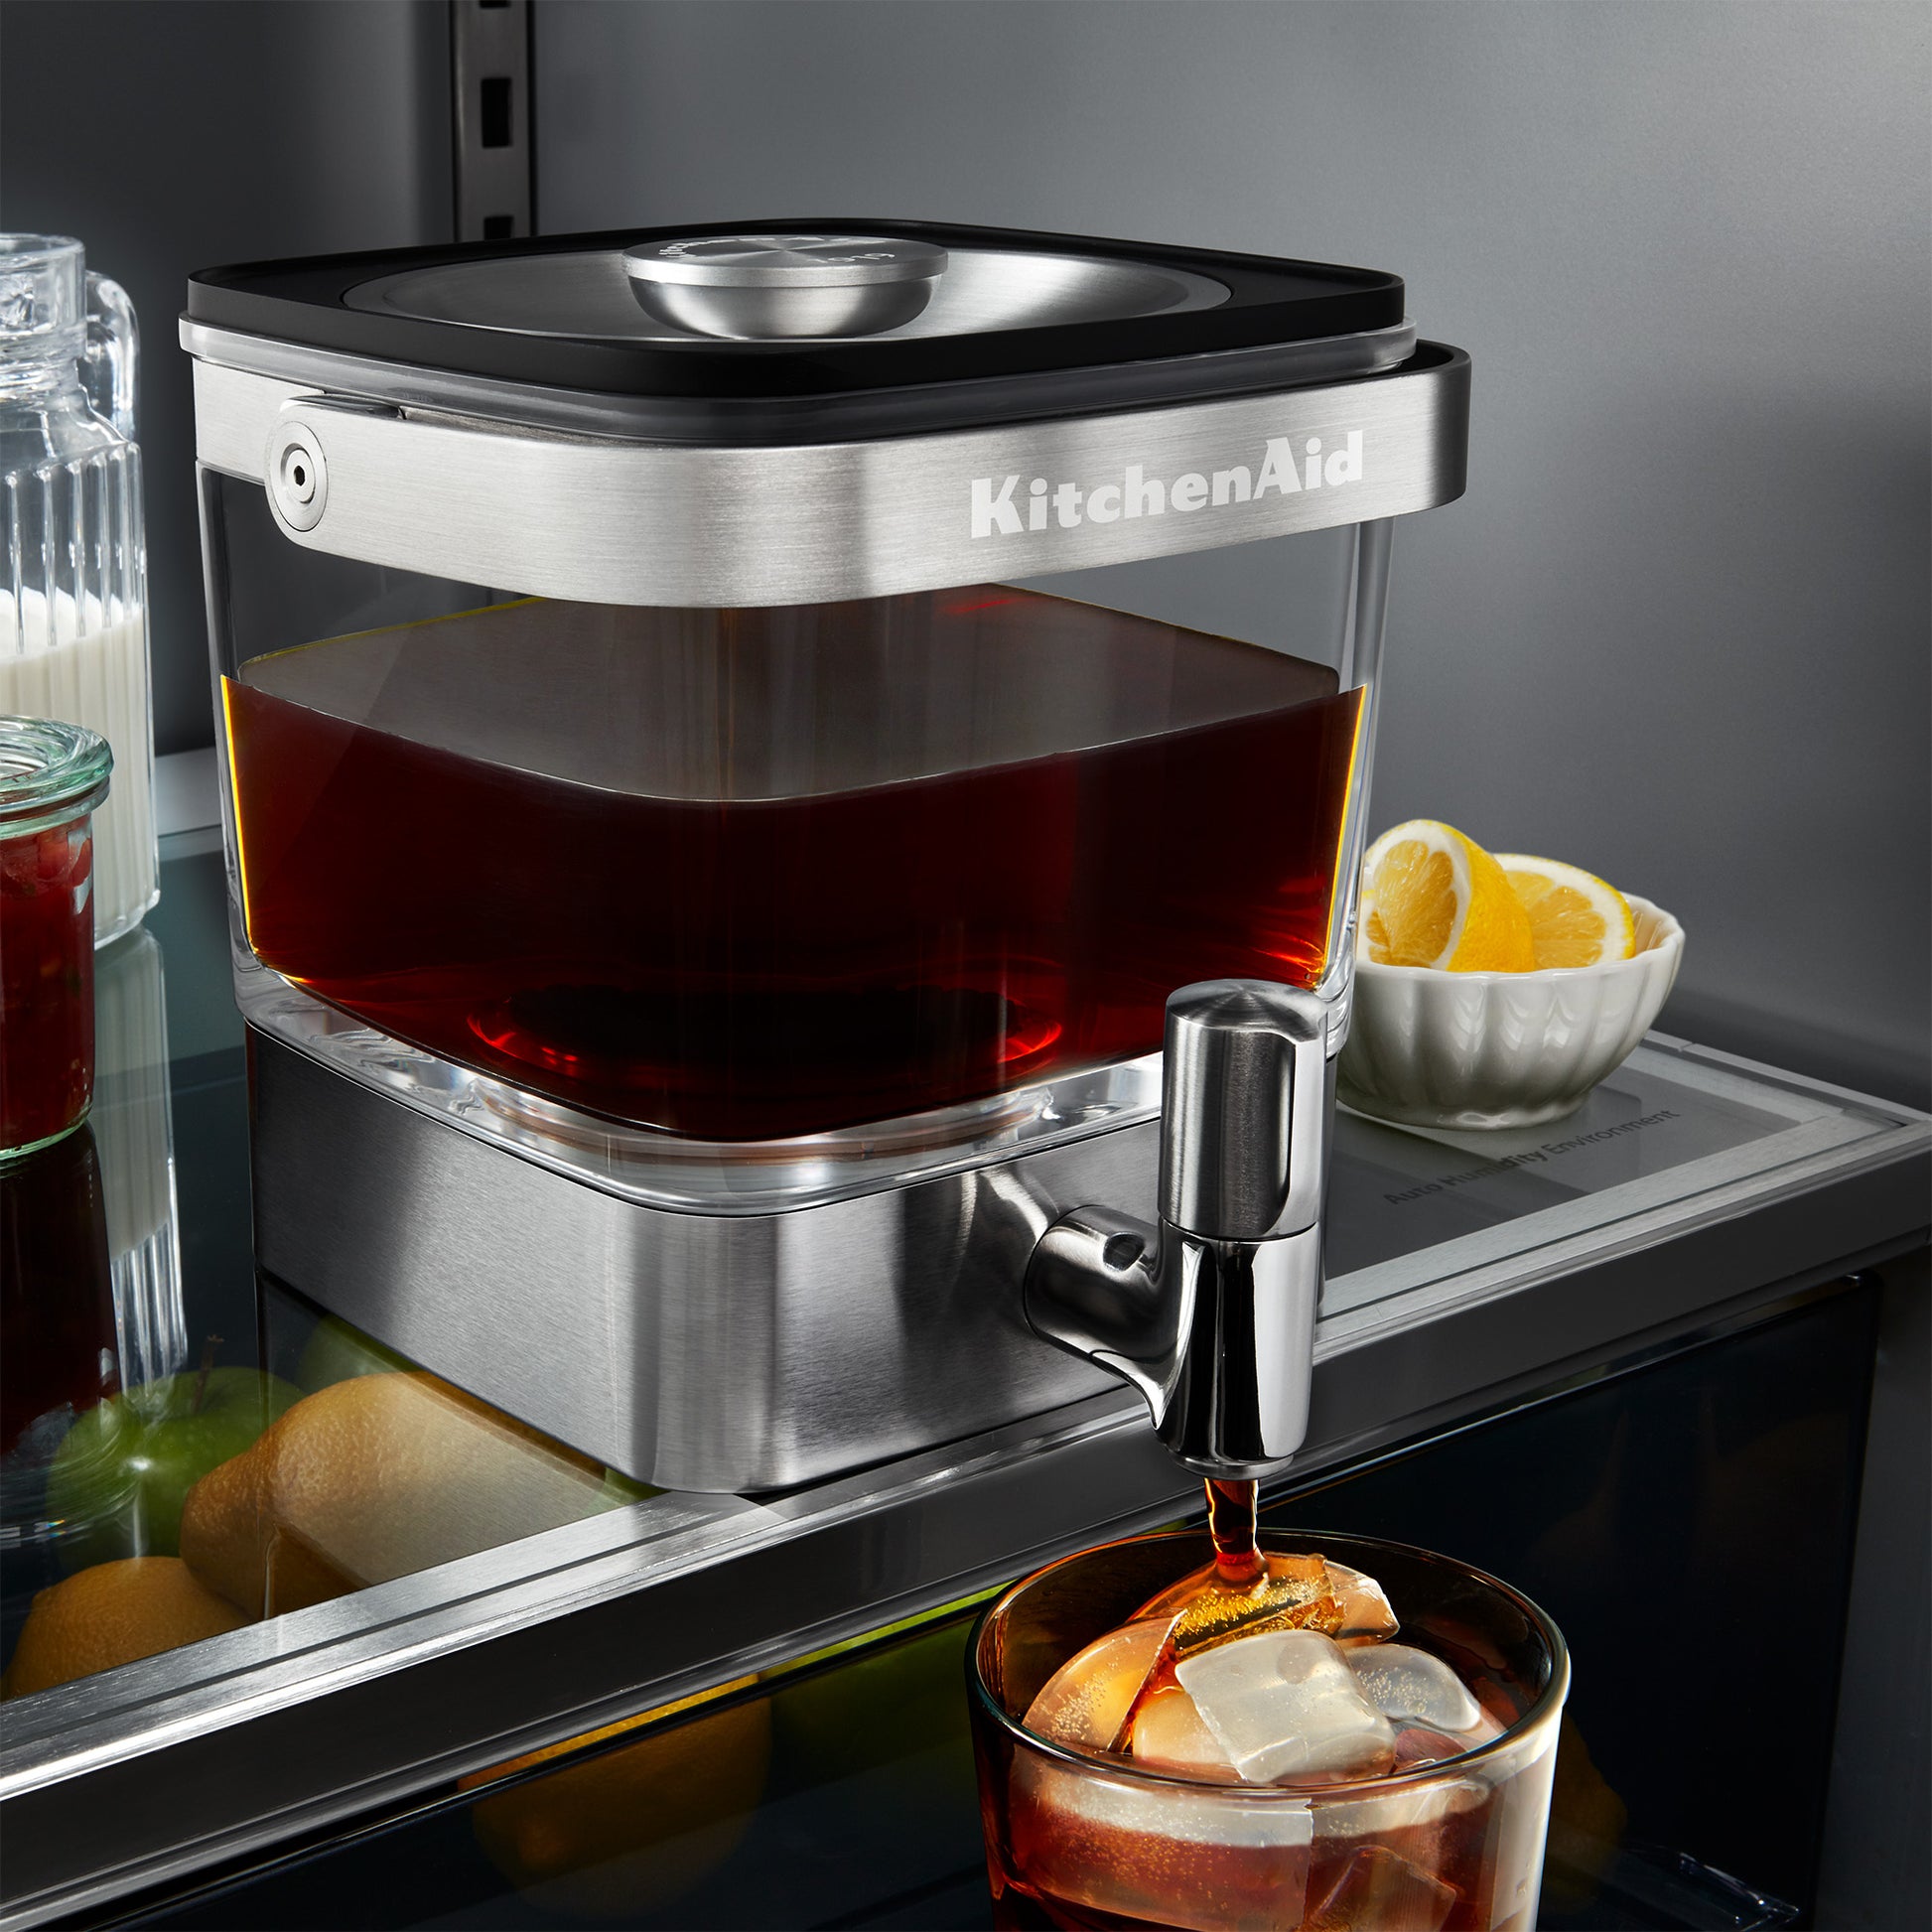 New KitchenAid® Cold Brew Coffee Maker Makes Home Brewing A Breeze